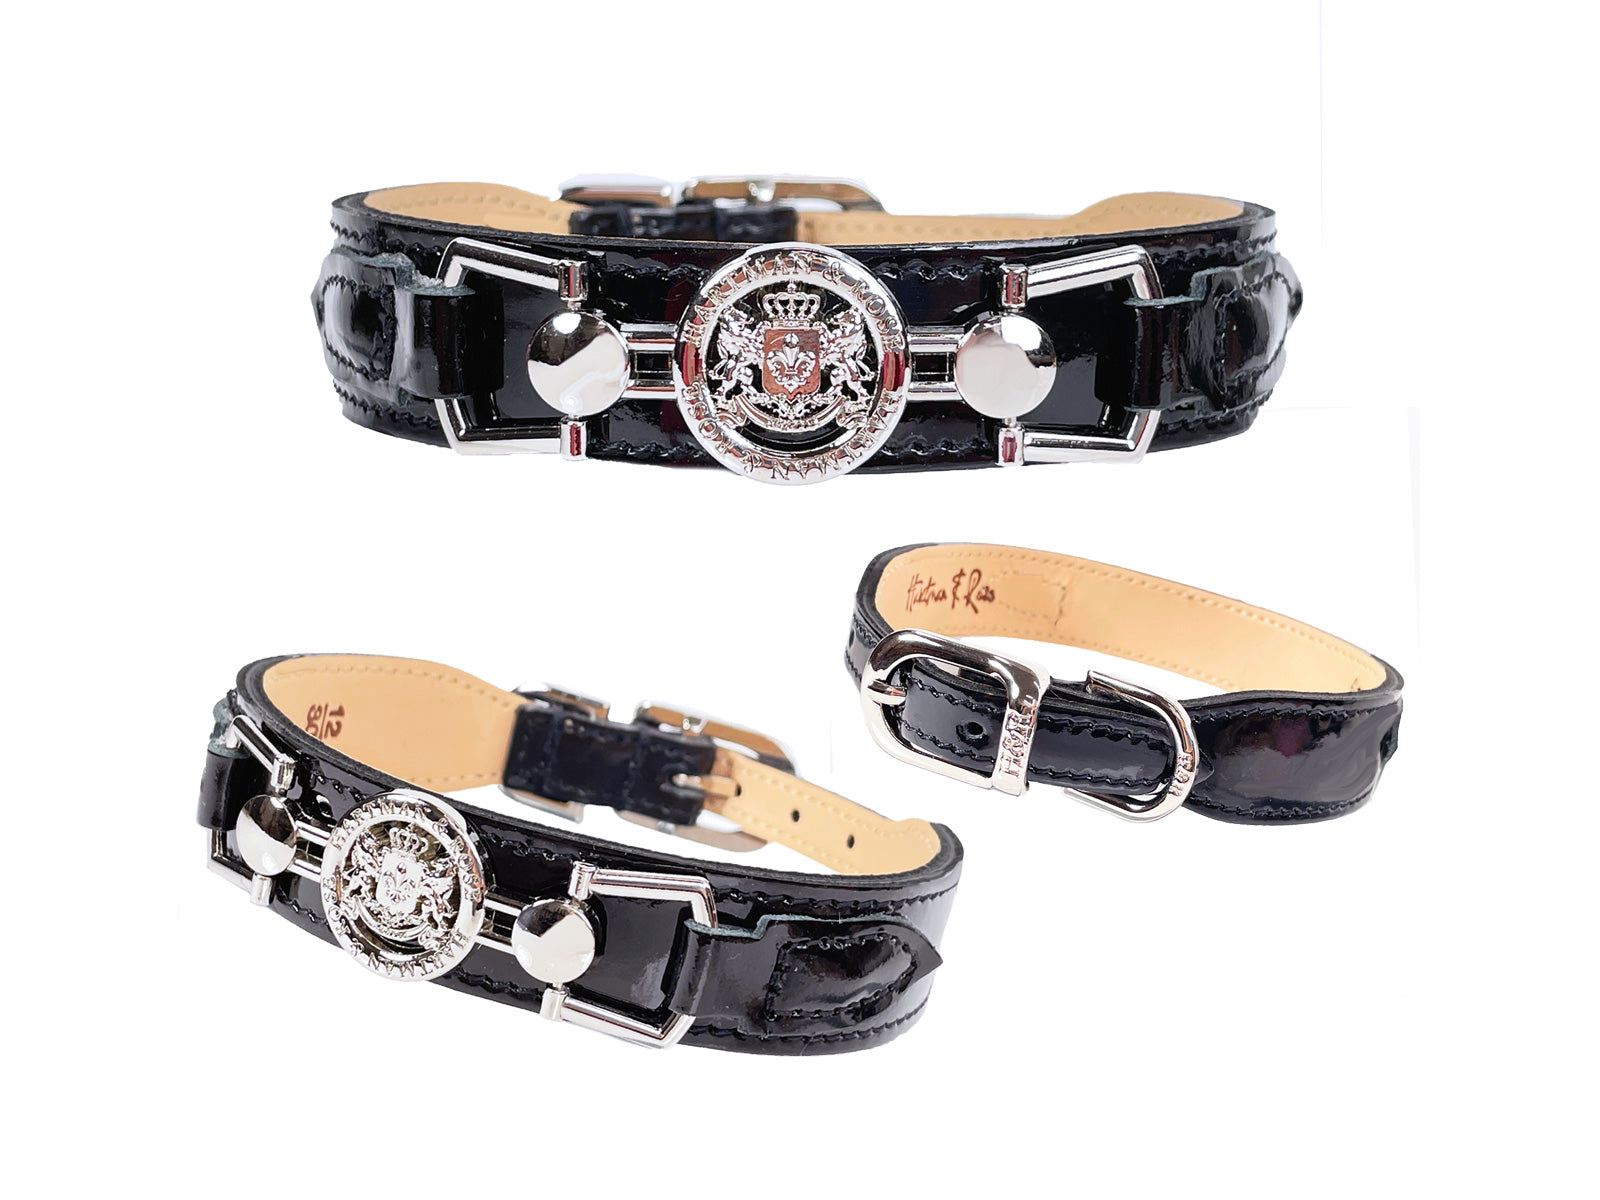 Dynasty Luxury Dog Collar and Leash Collection